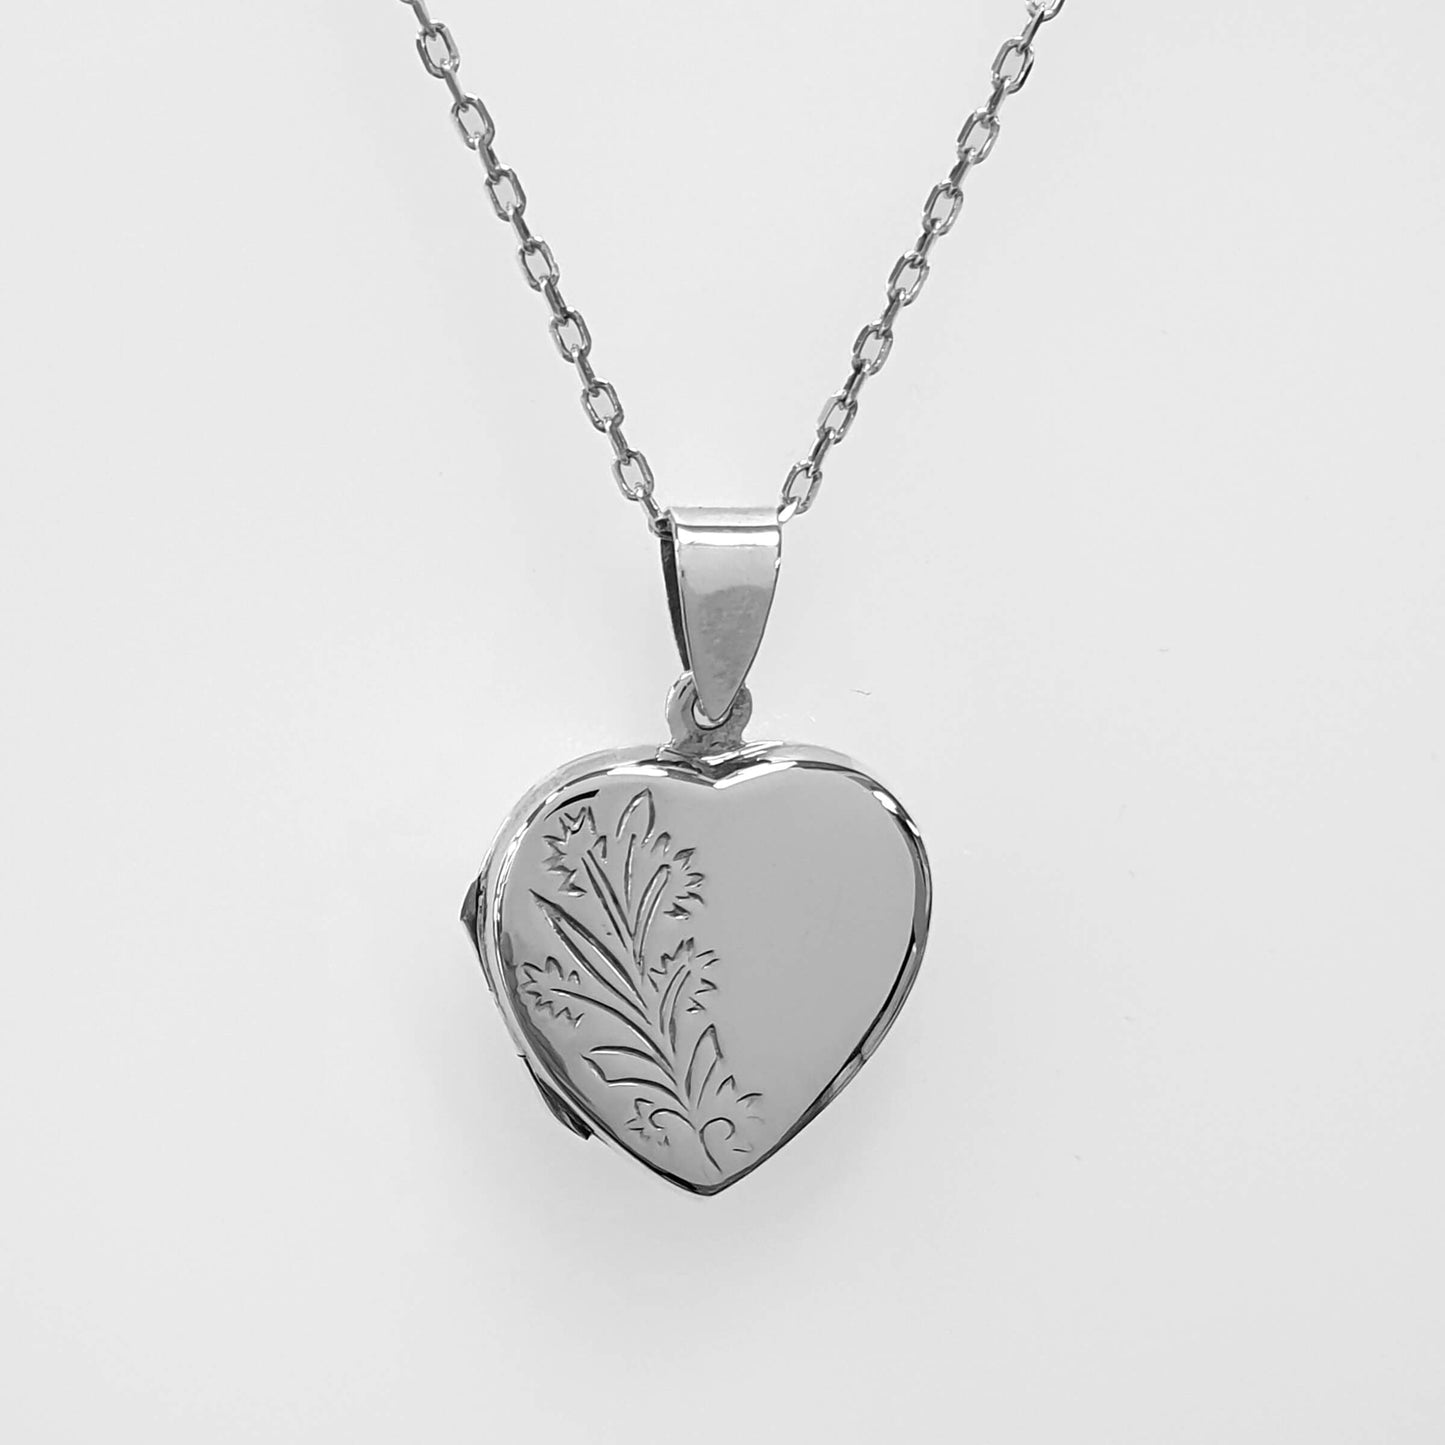 Heart shaped double photo locket in sterling silver on a white background